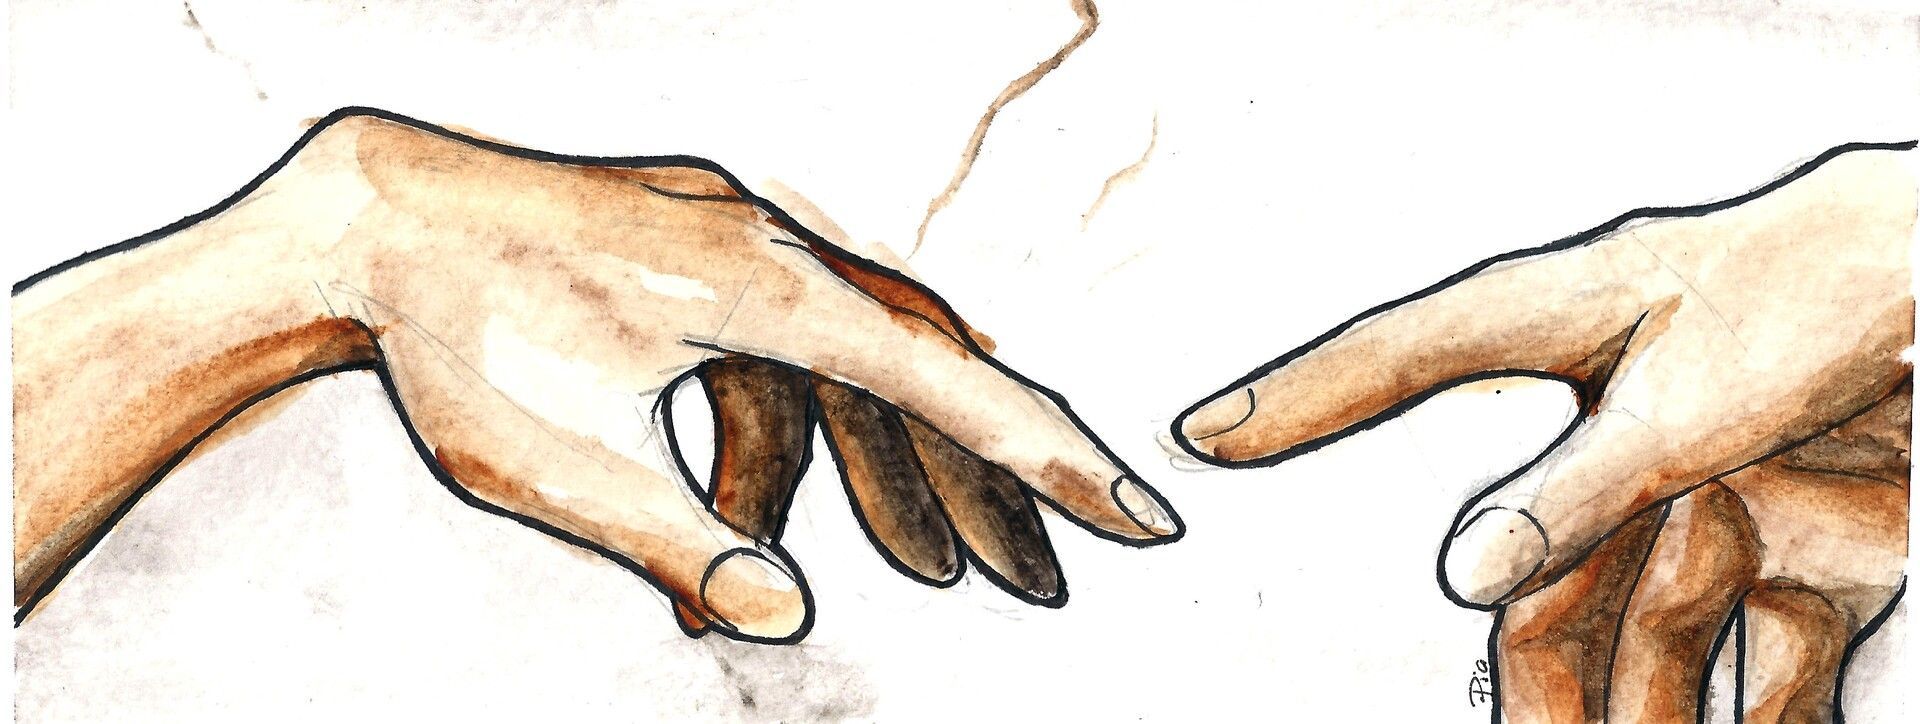 A drawing of two hands reaching out to each other - The Creation of Adam